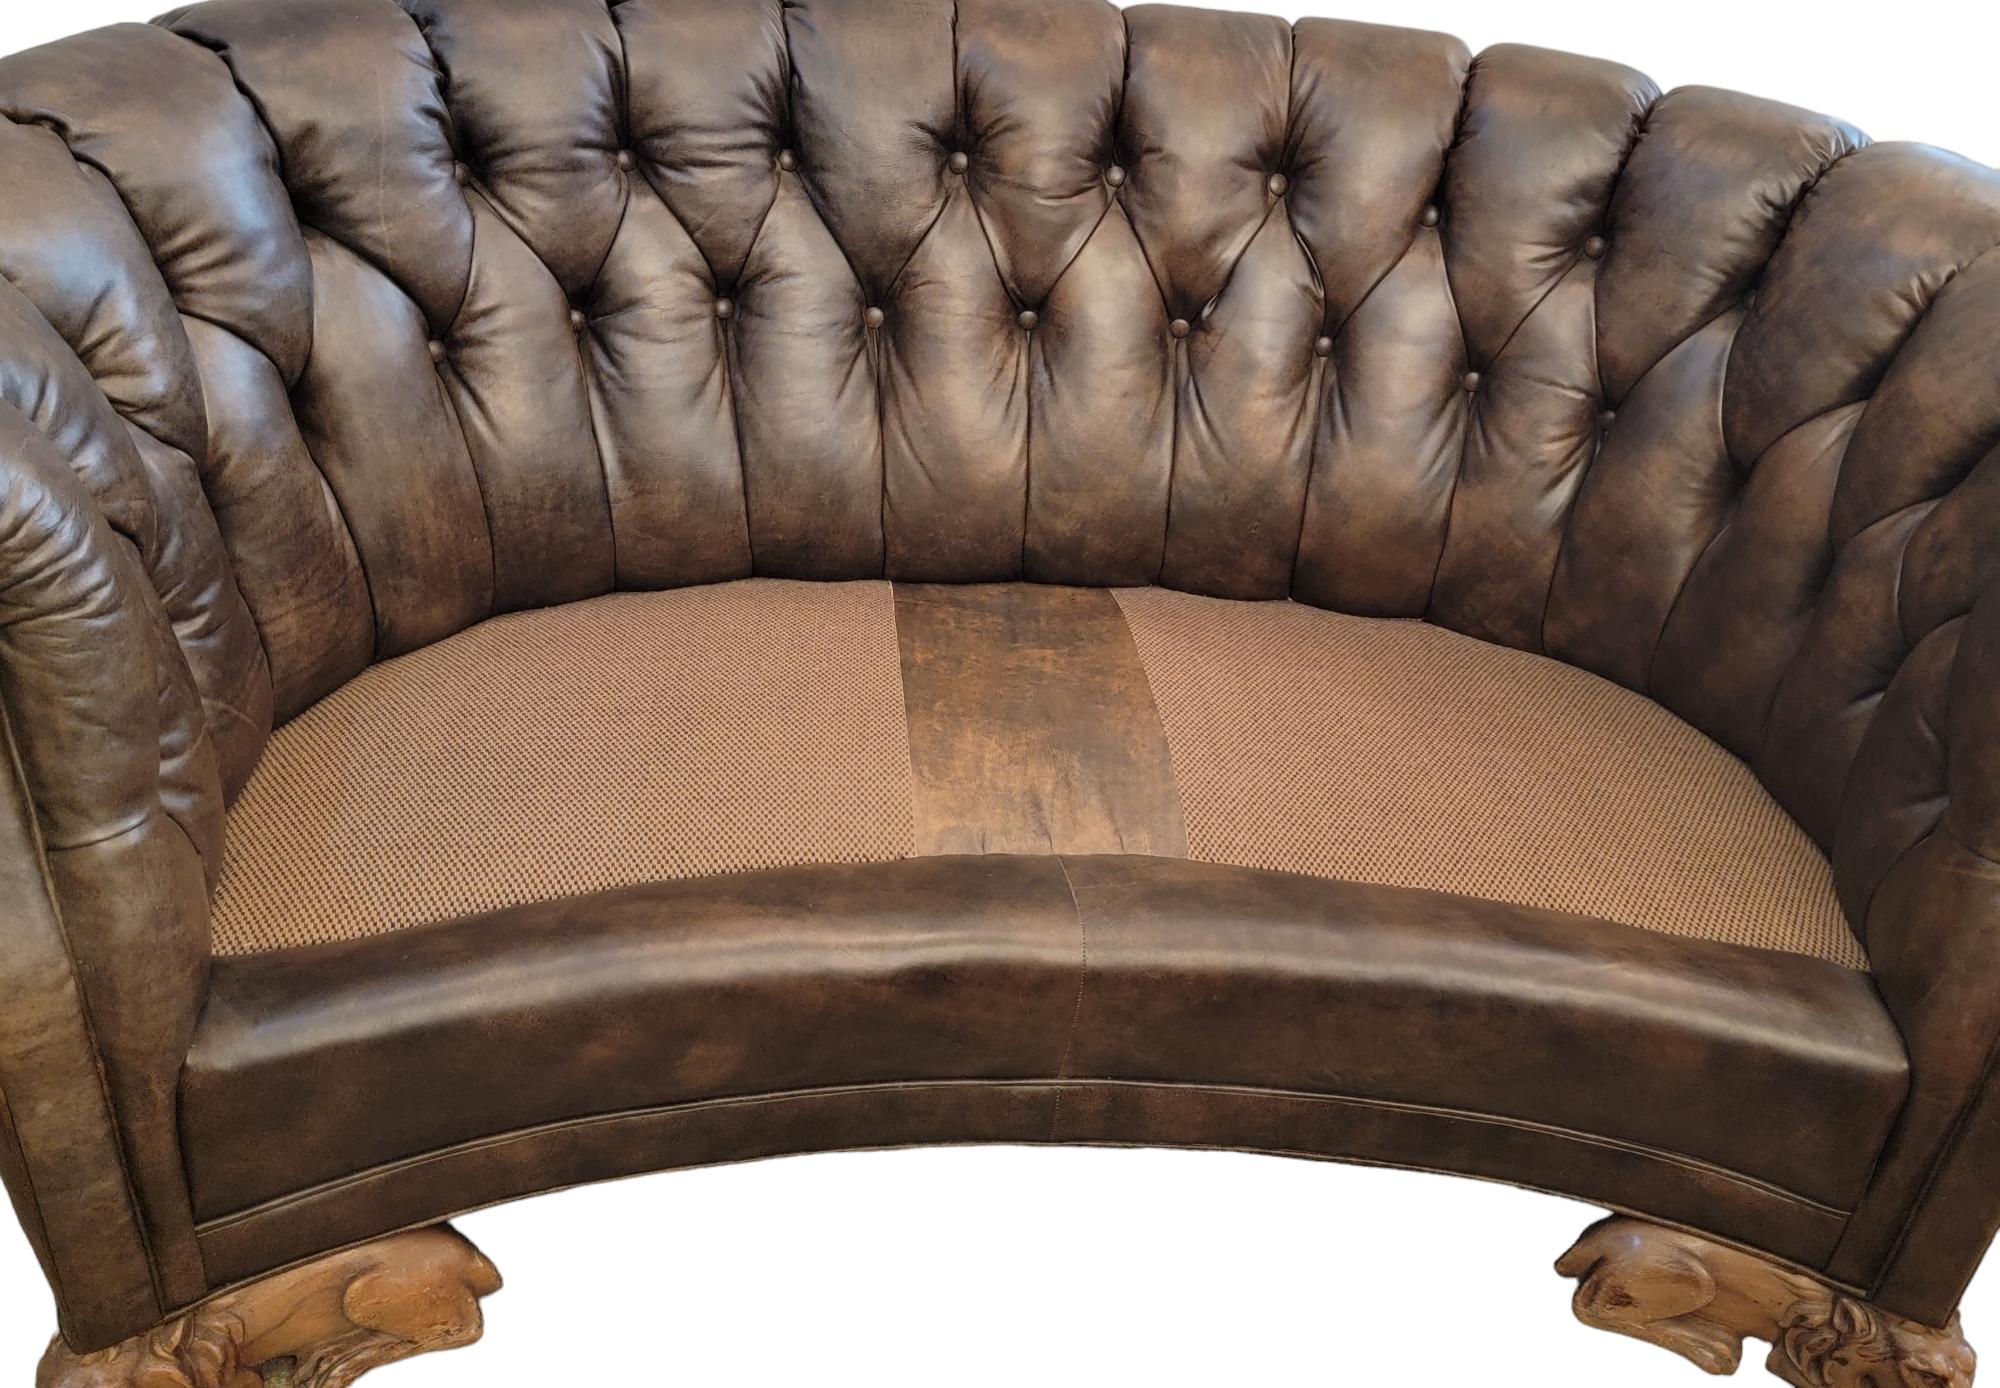 Early 20th Century Antique English Chester field Sofa with Hand Carved Wood Lion Legs For Sale